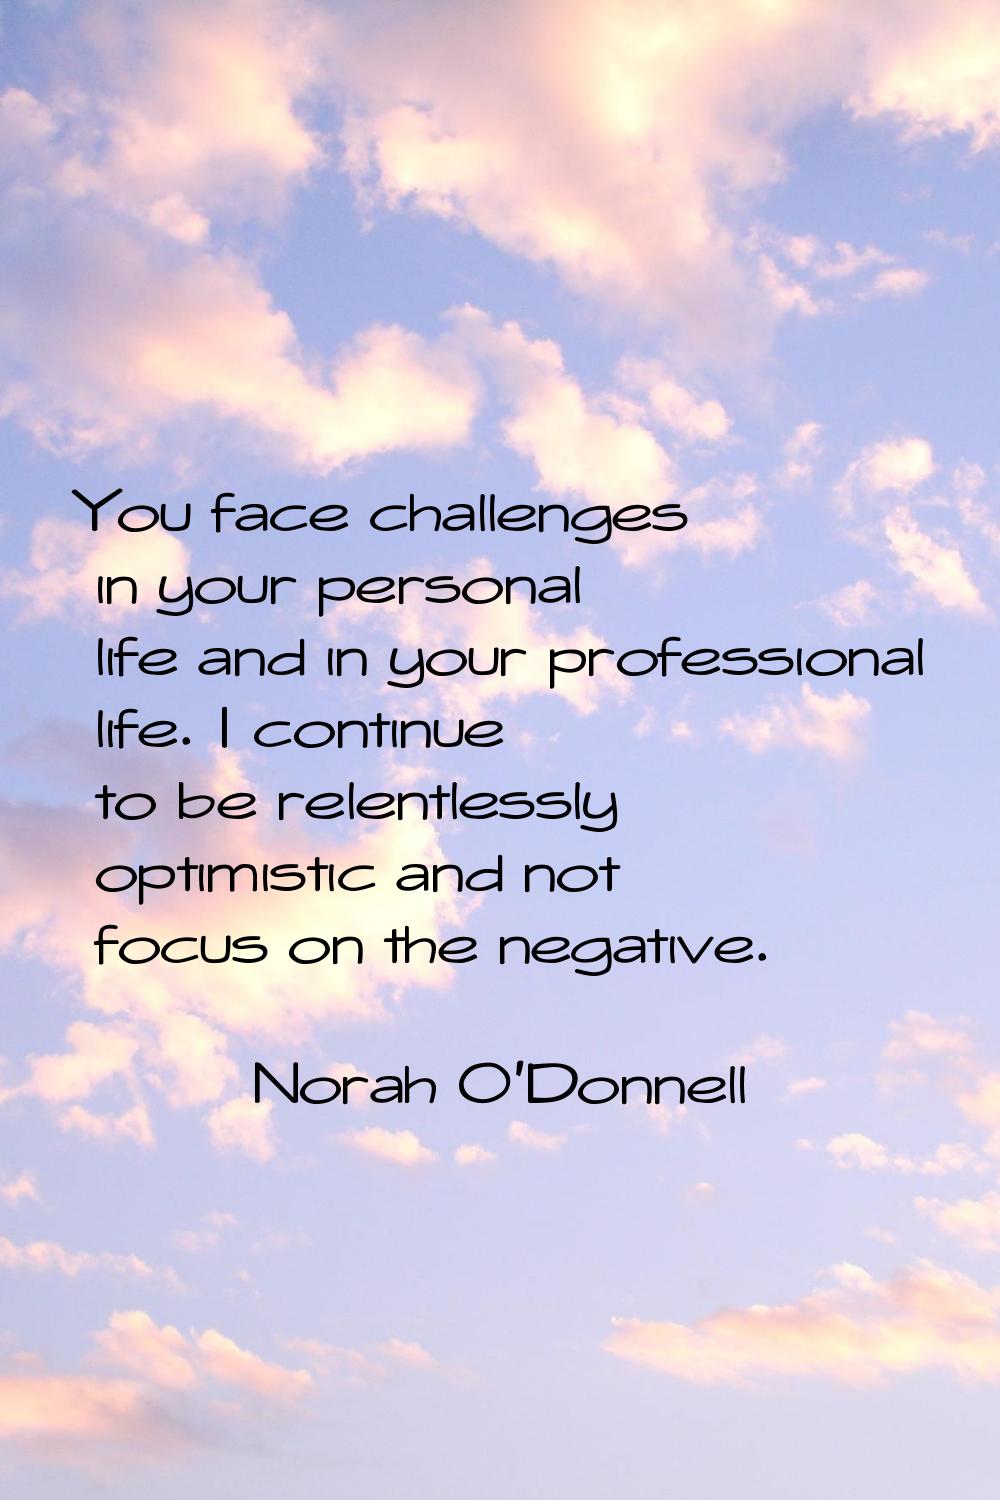 You face challenges in your personal life and in your professional life. I continue to be relentles